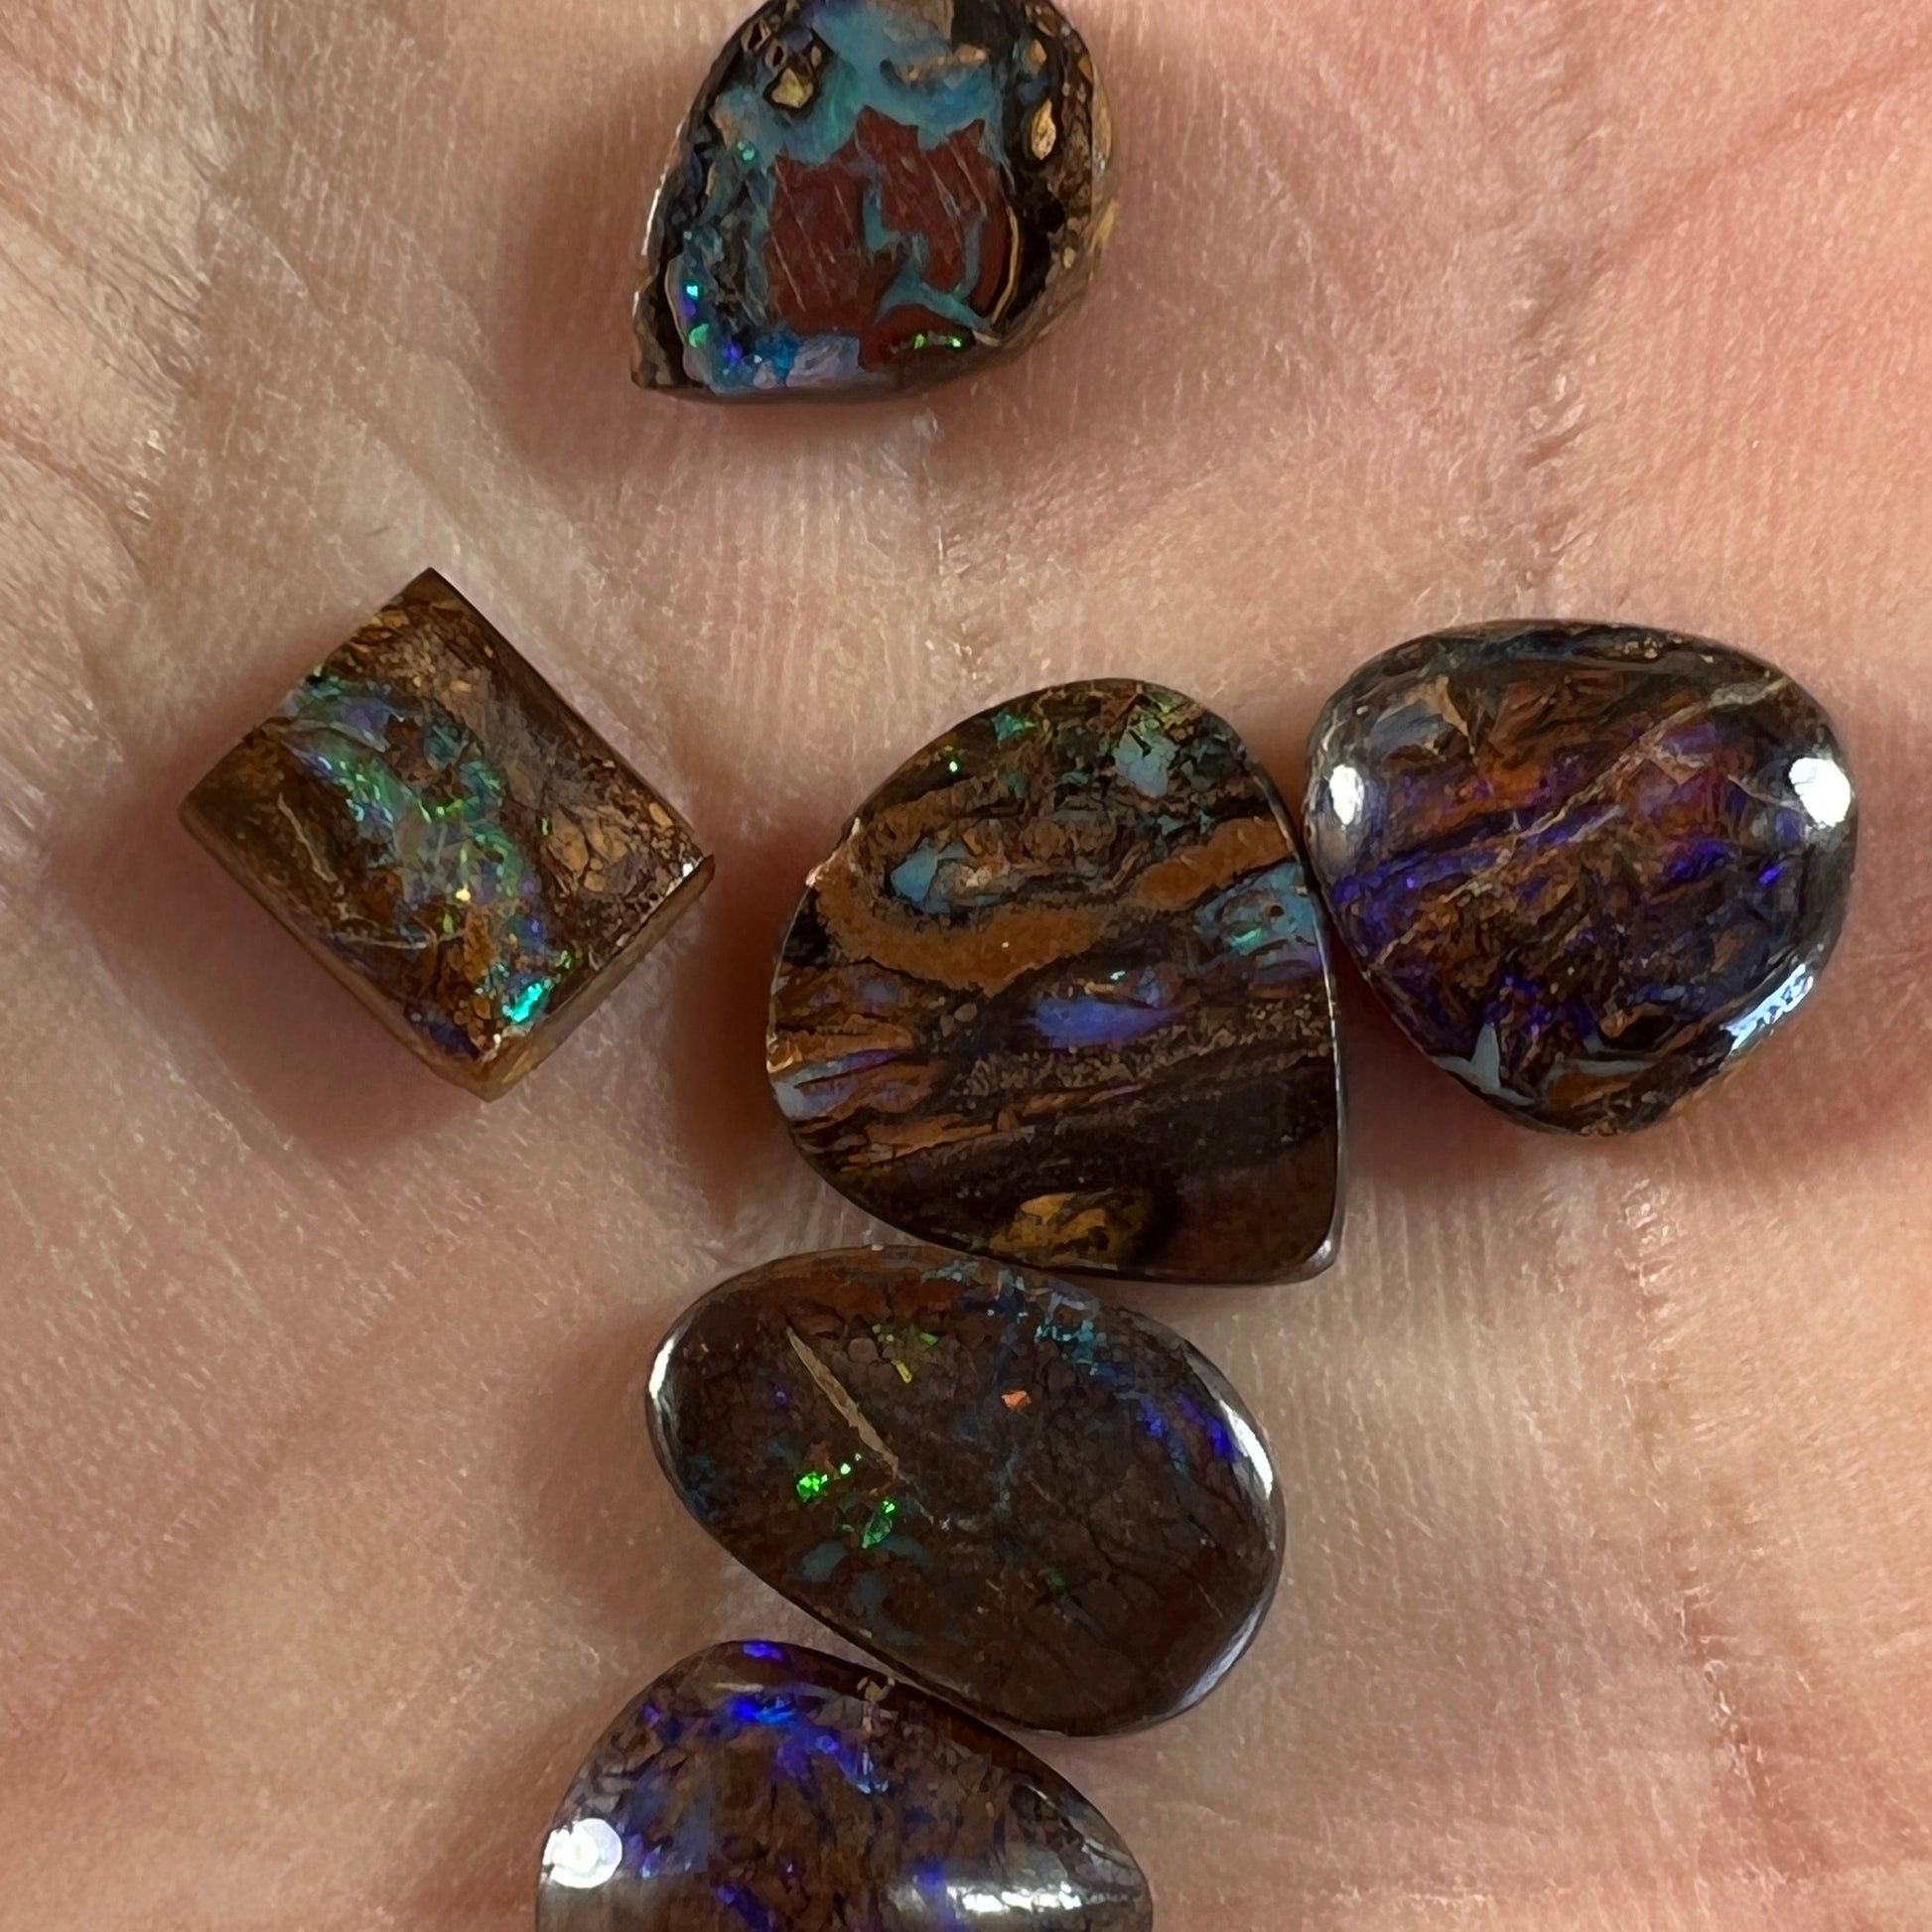 Six lovely boulder opals. Great little coloured pieces.